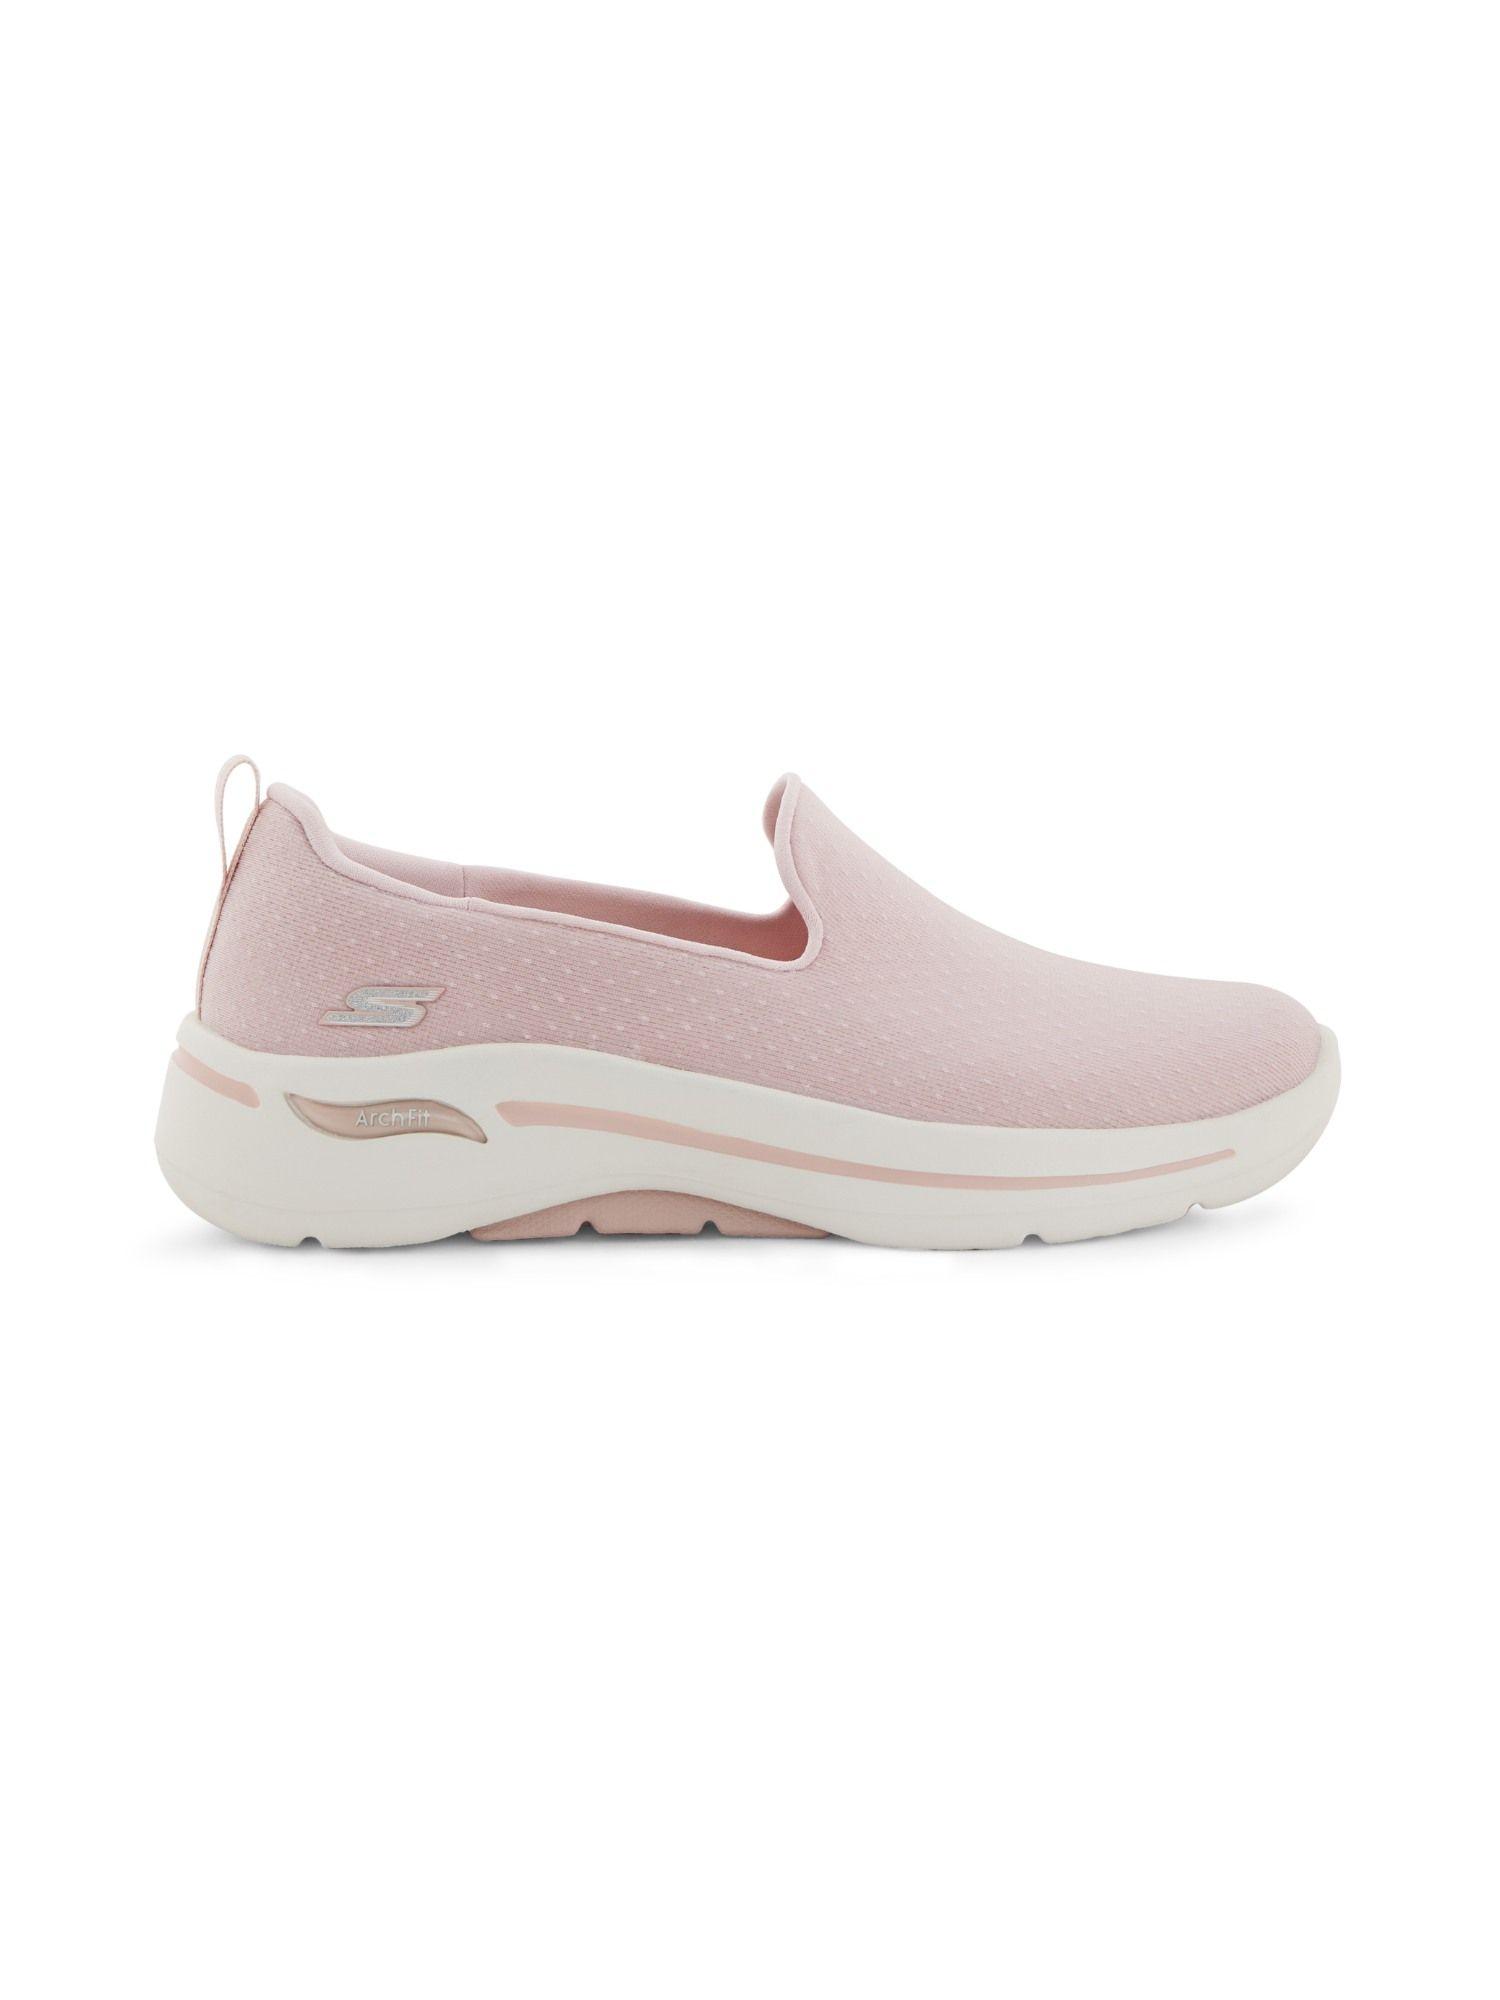 go walk arch fit - morning st pink walking shoes